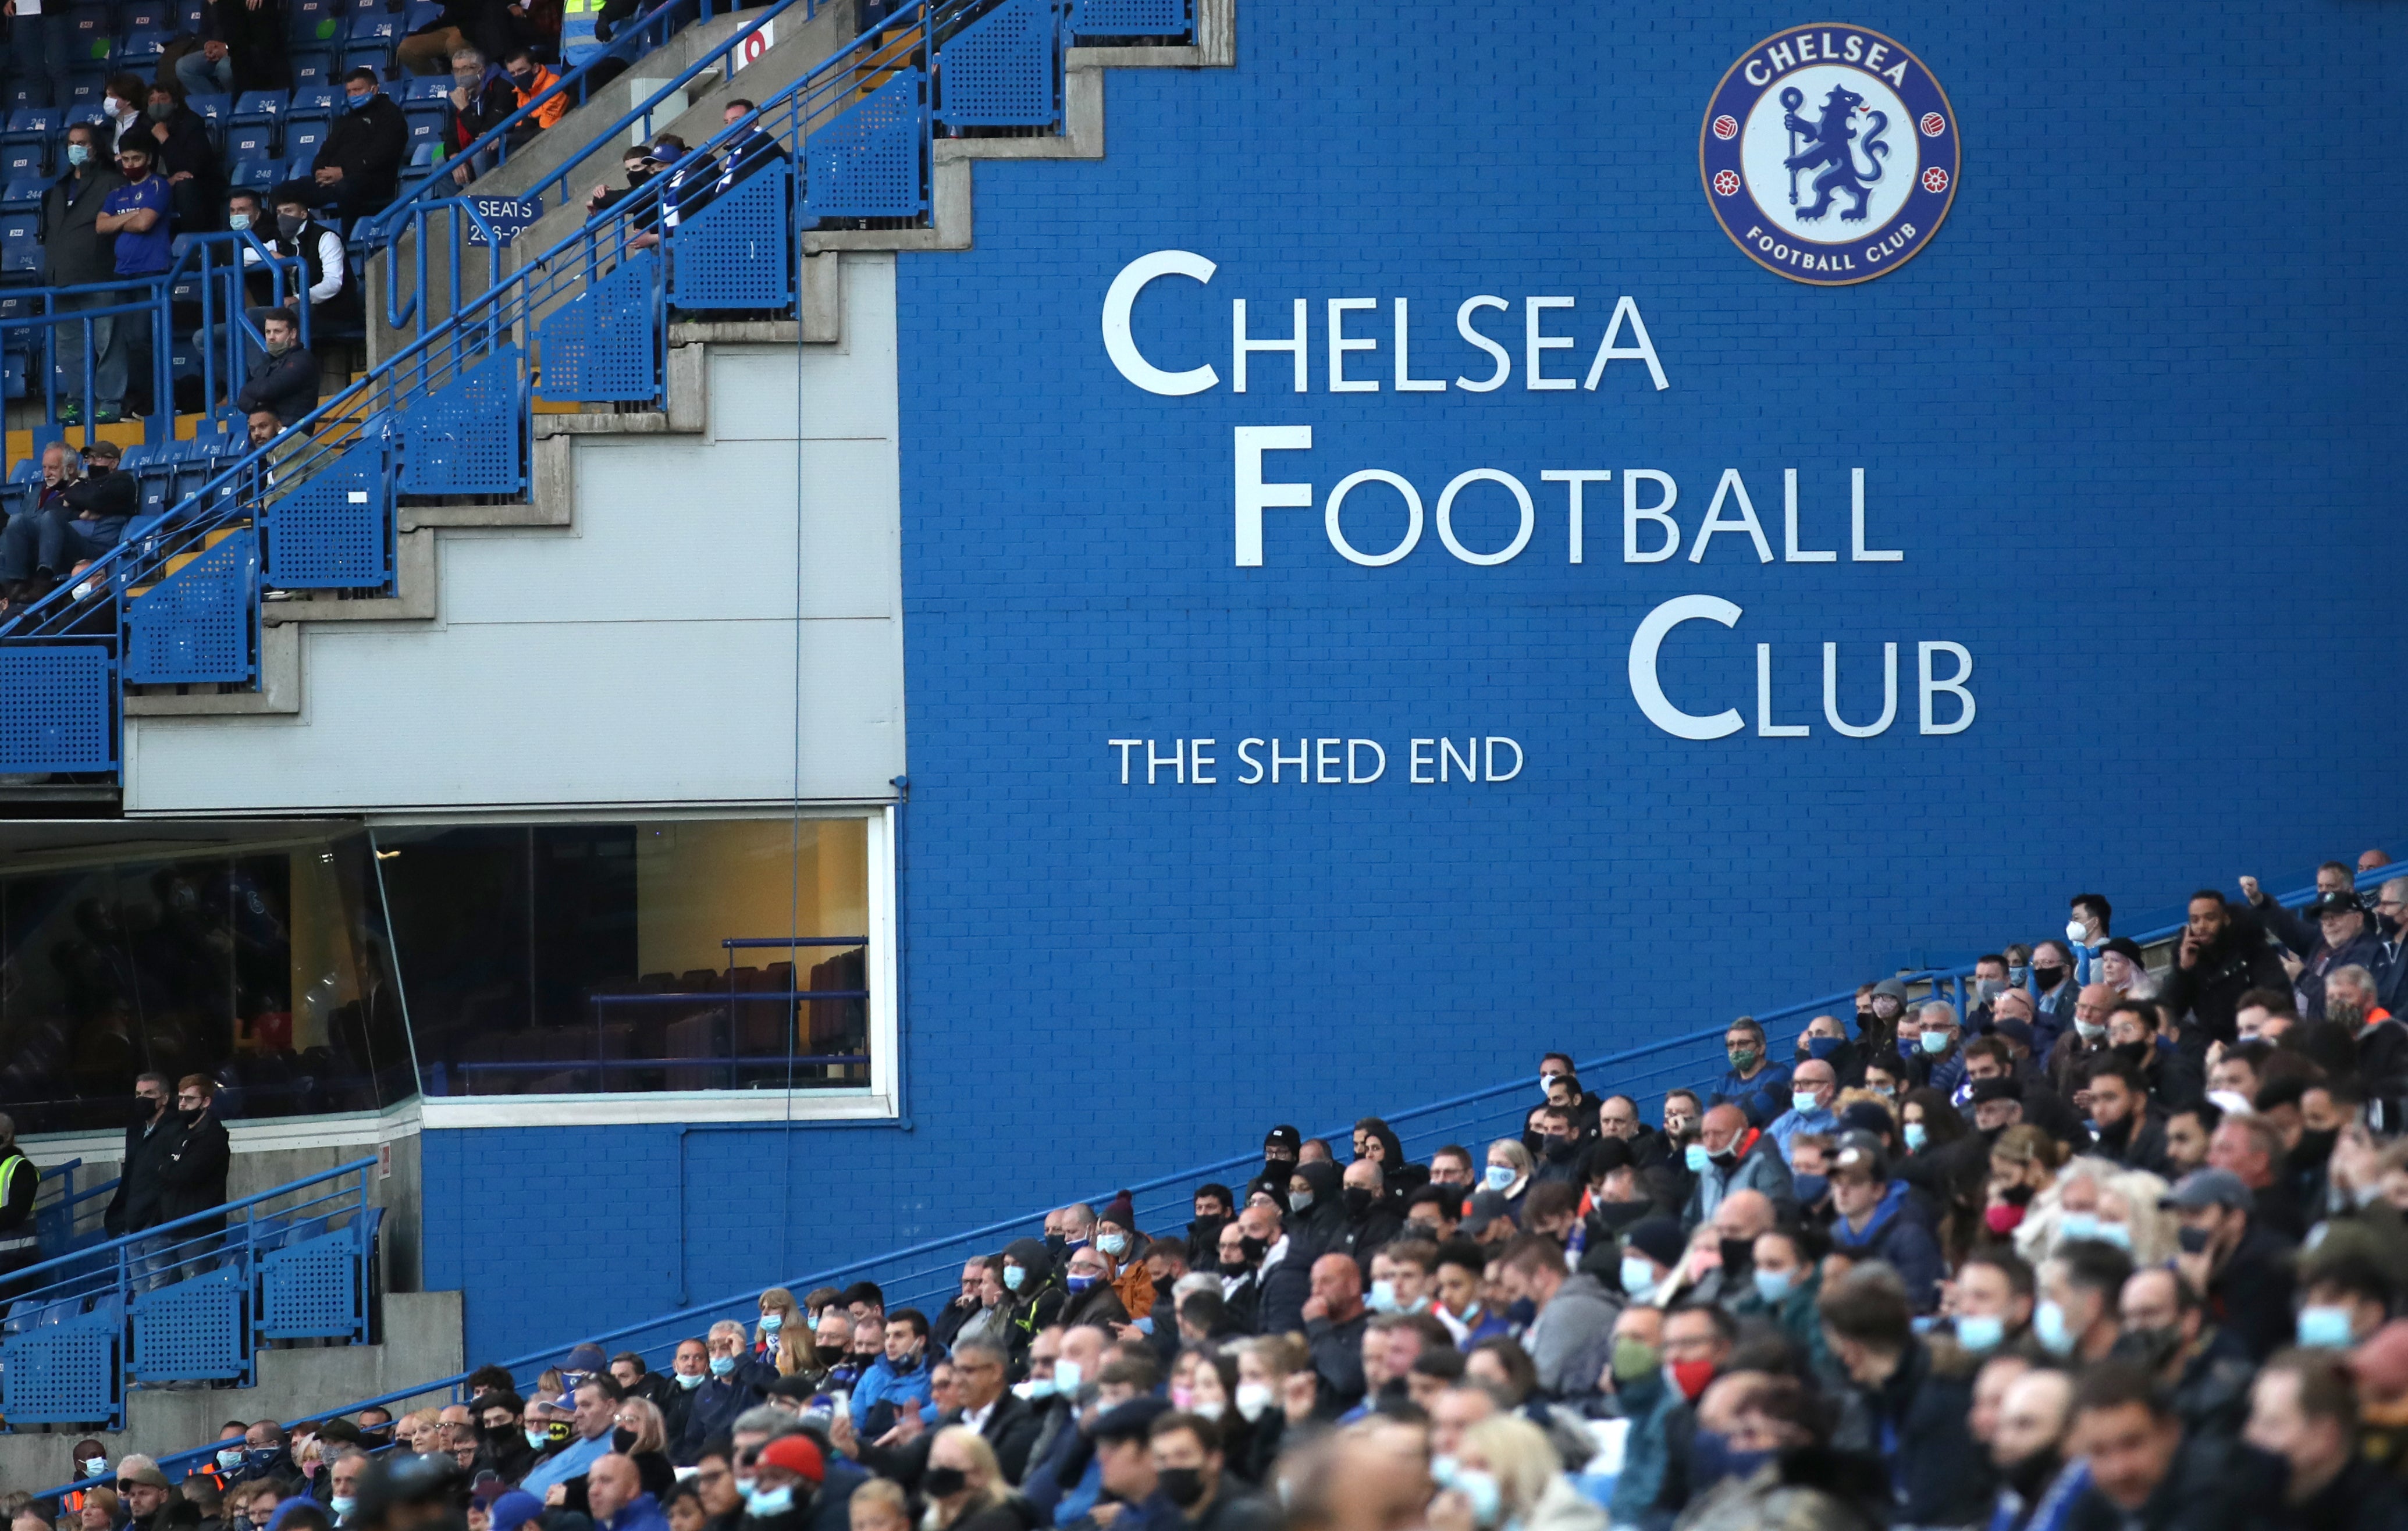 Stamford Bridge and plans for redevelopment will be key to bidders’ chances of winning the race to buy Chelsea (Peter Cziborra/PA)